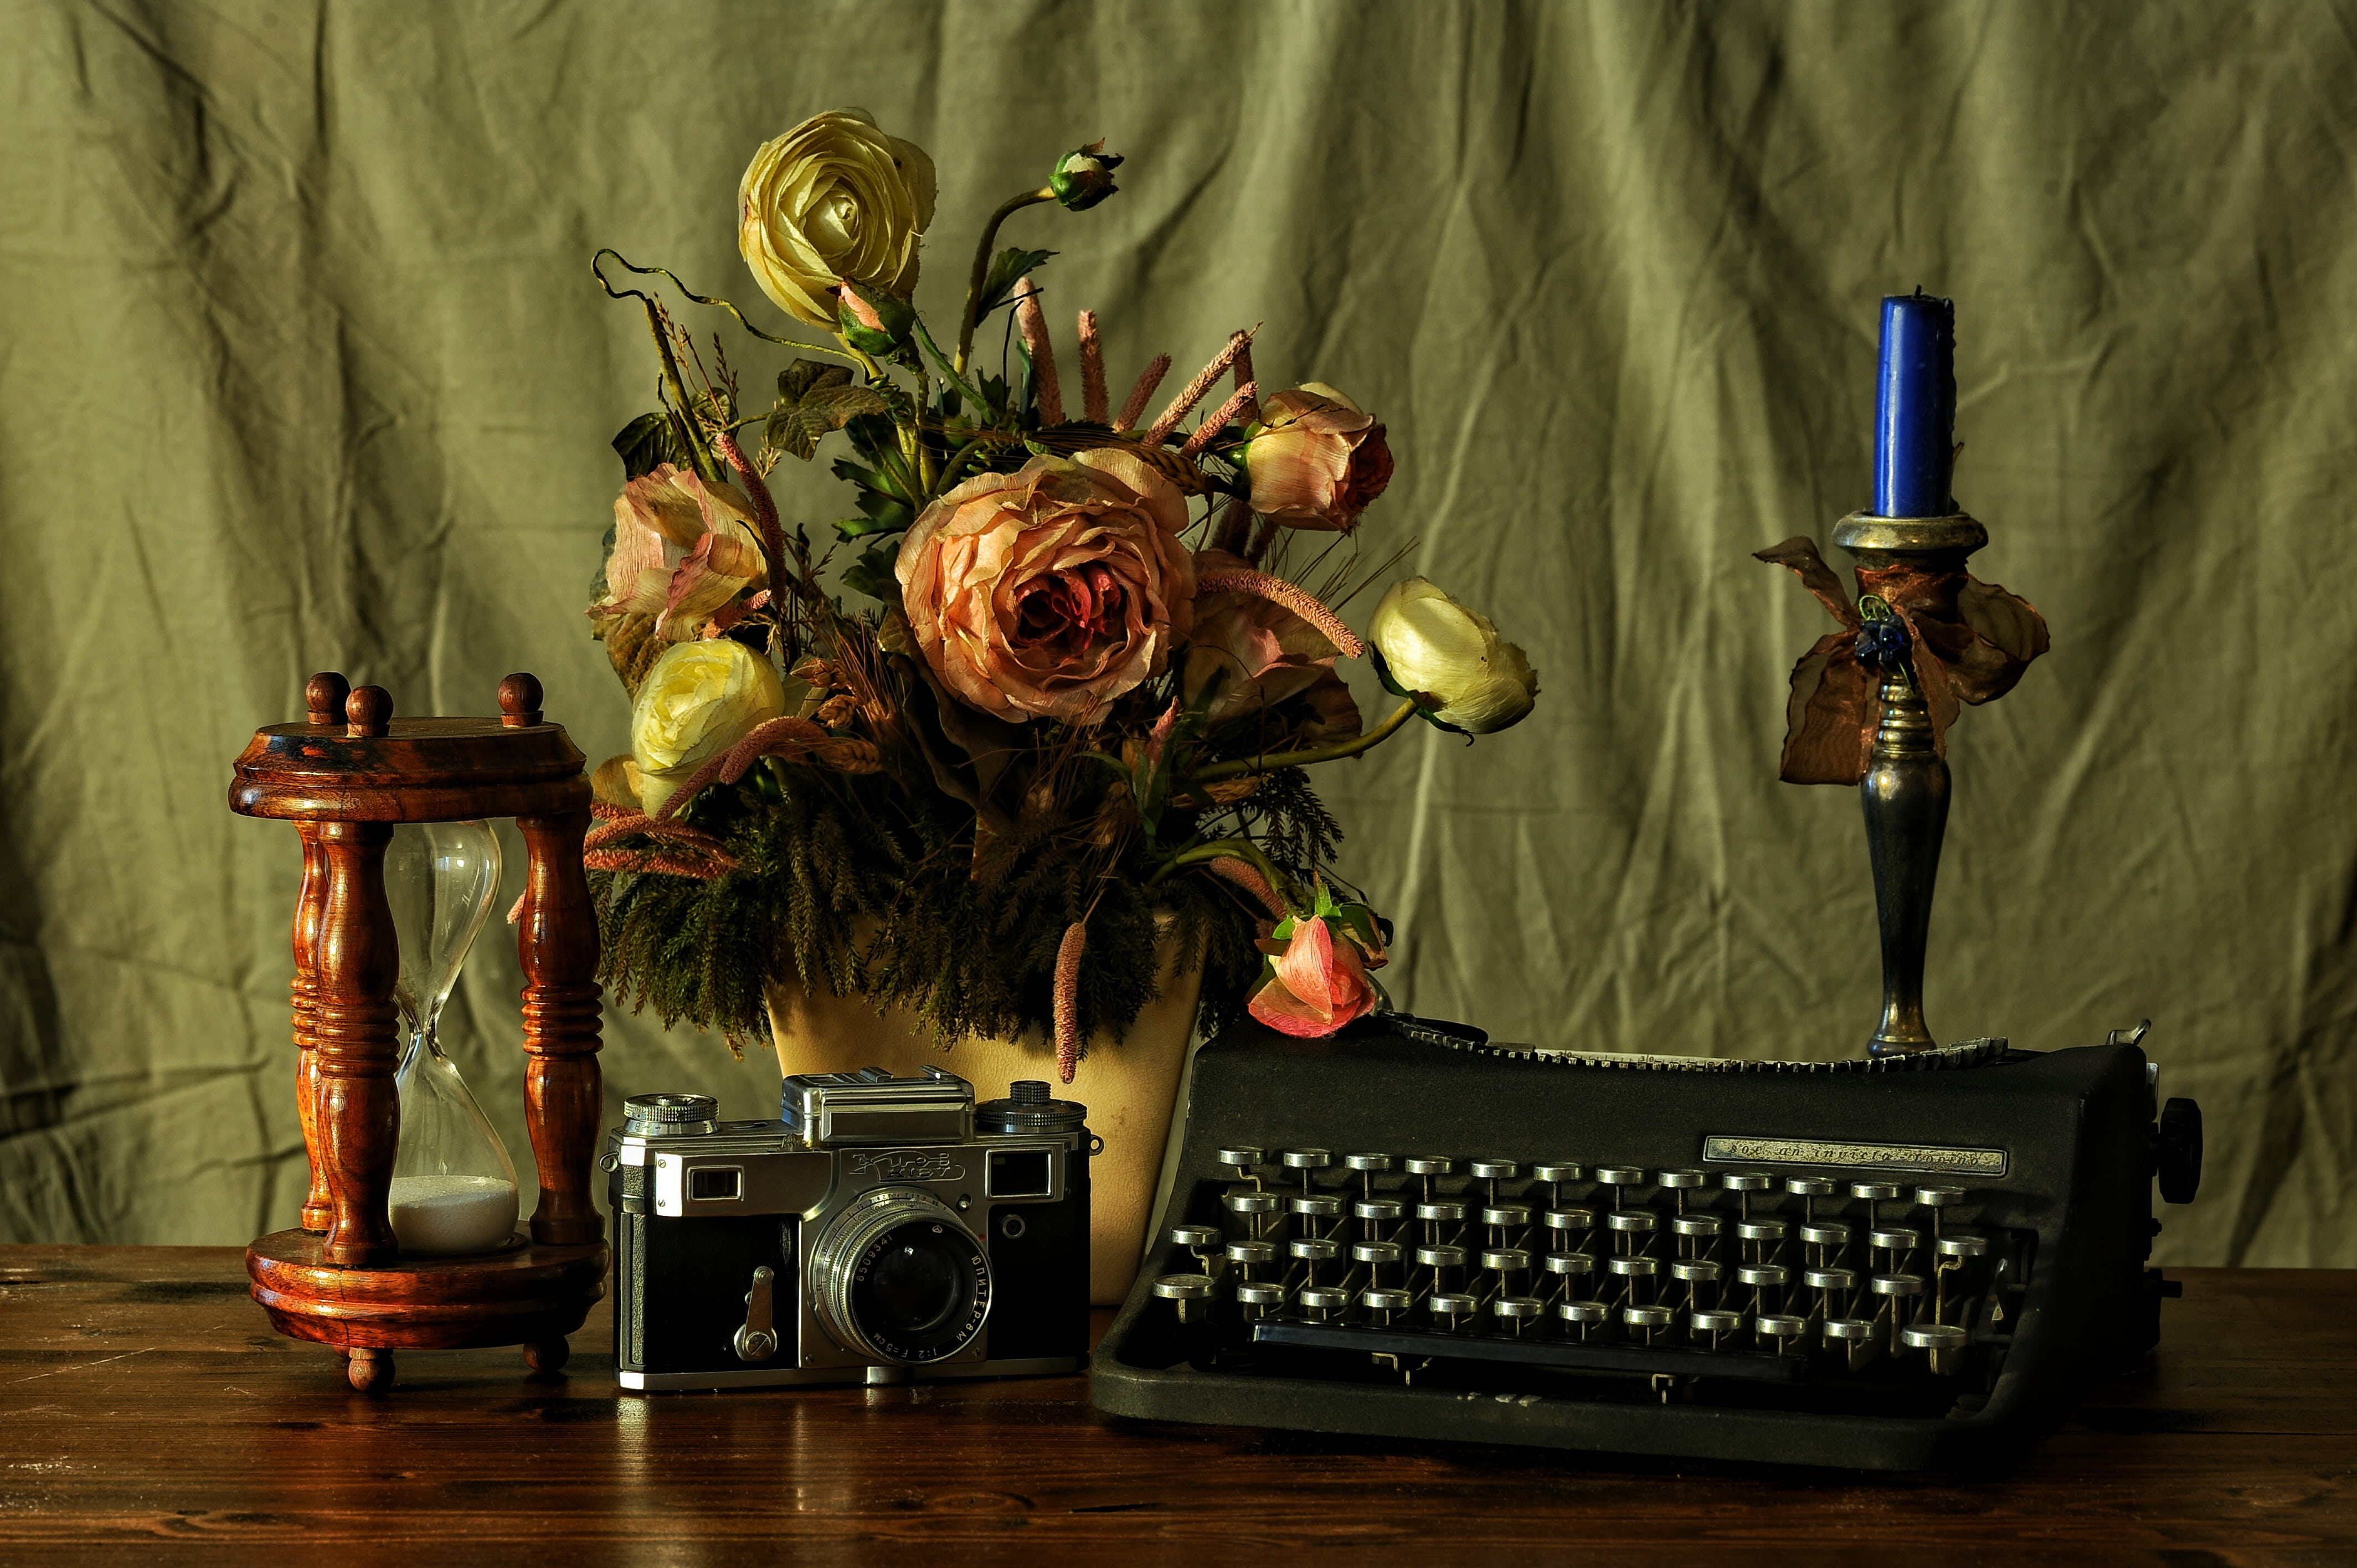 typewriter beside camera, hourglass, flower decor, and candlestick with candle on table